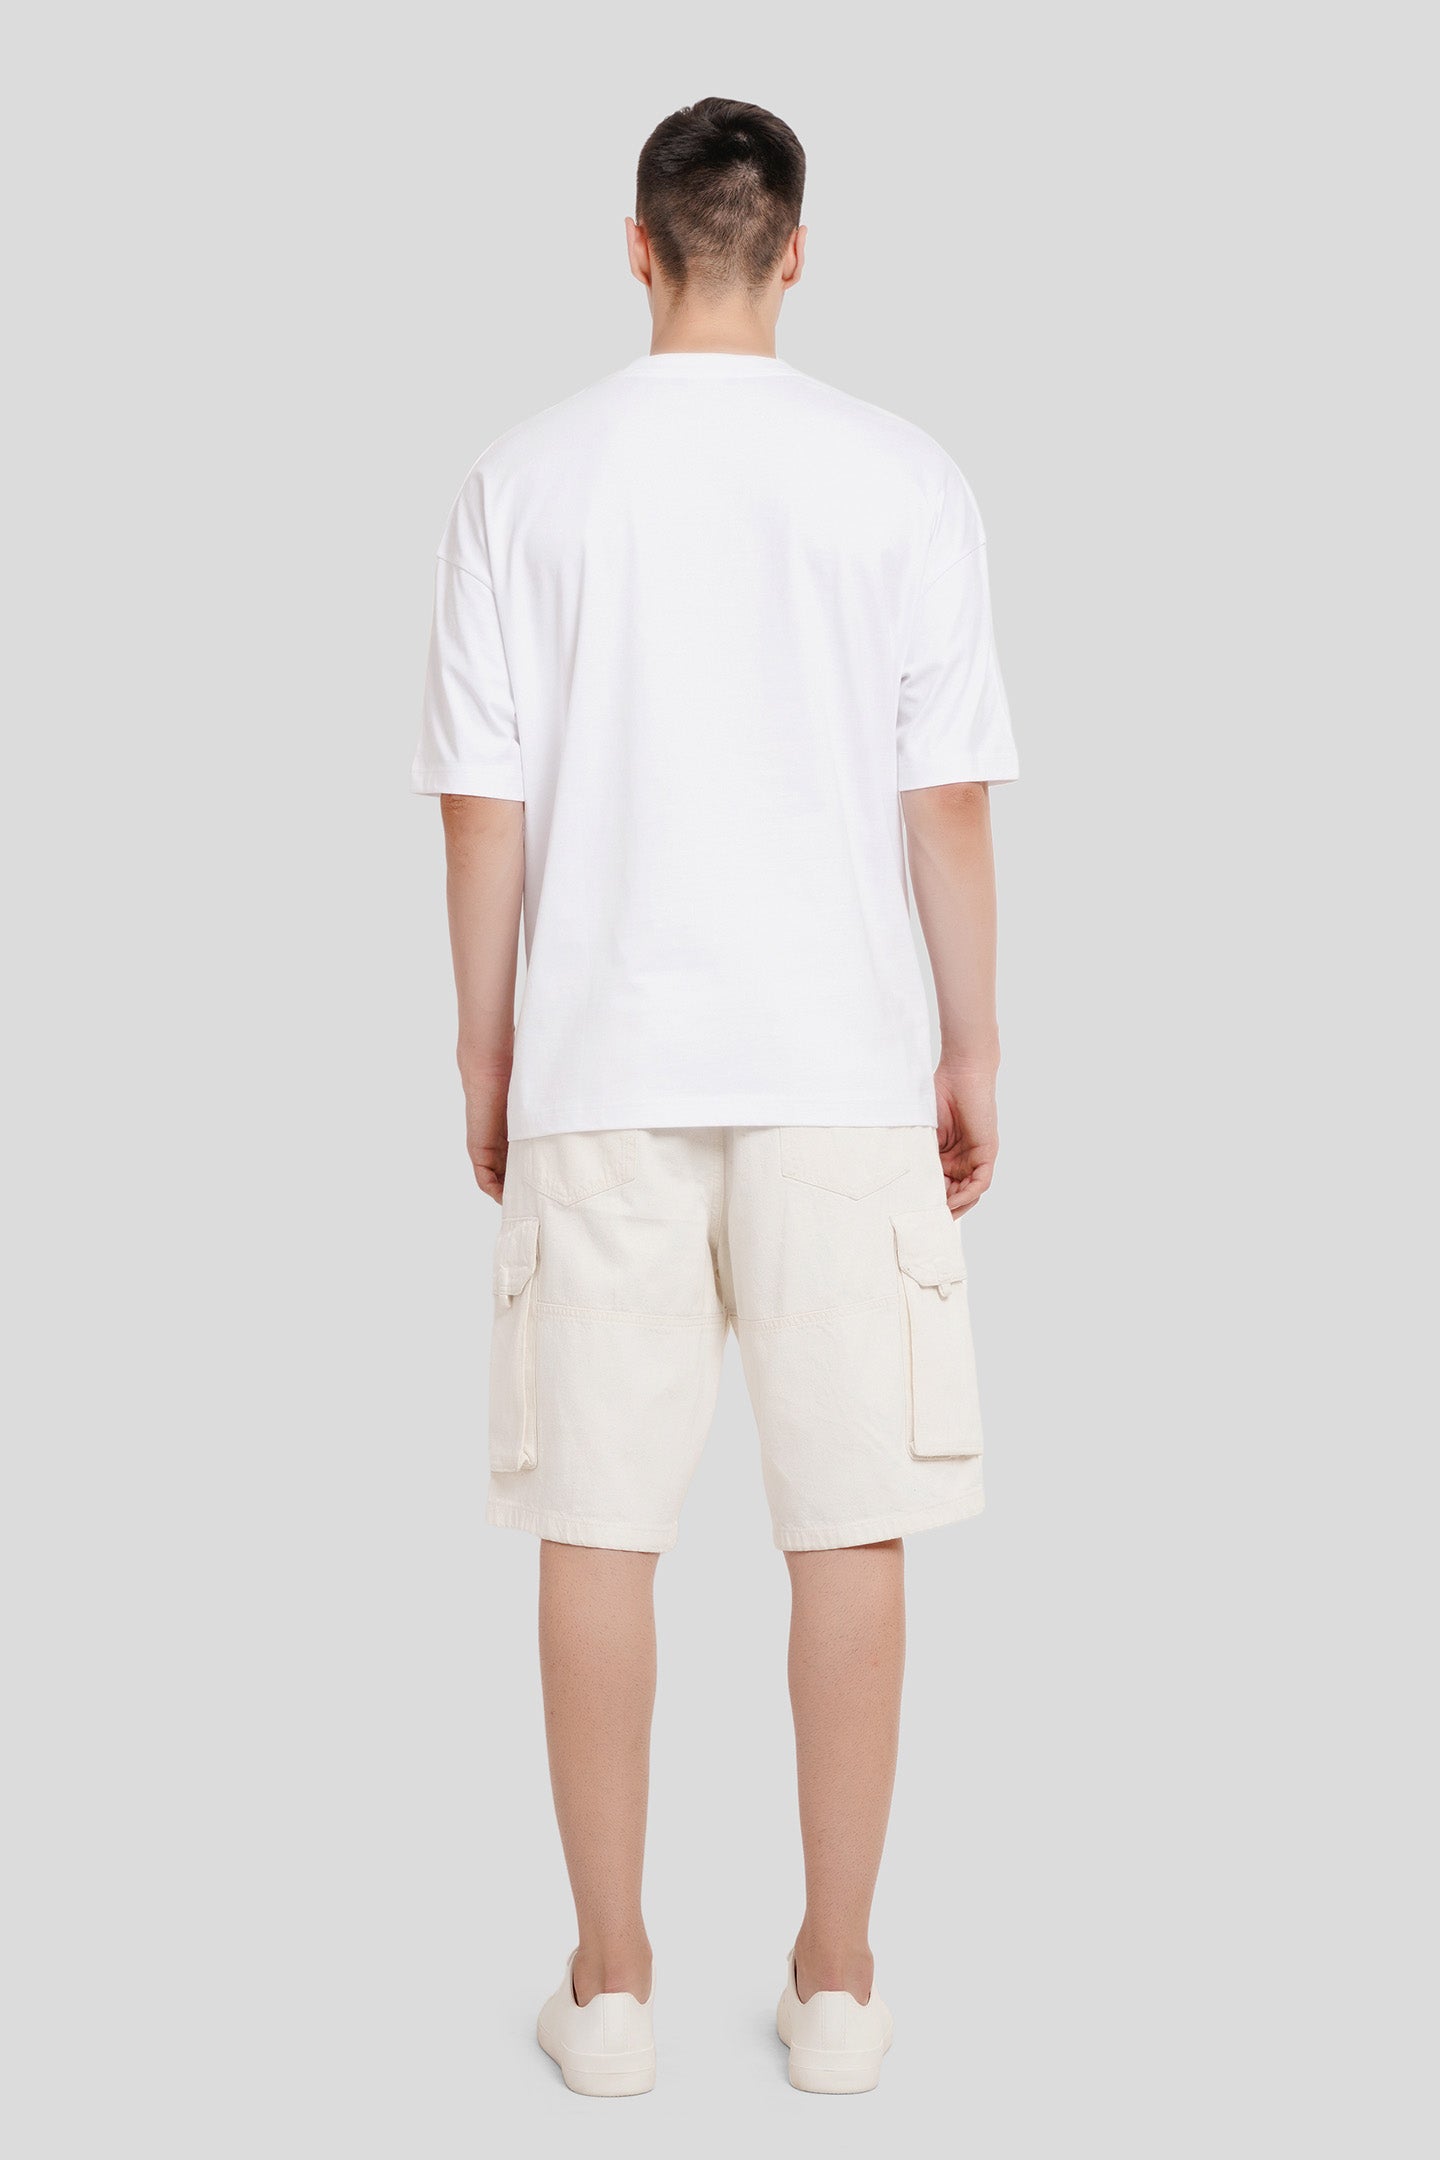 Born To Be Wild White Baggy Fit T-Shirt Men Pic 5